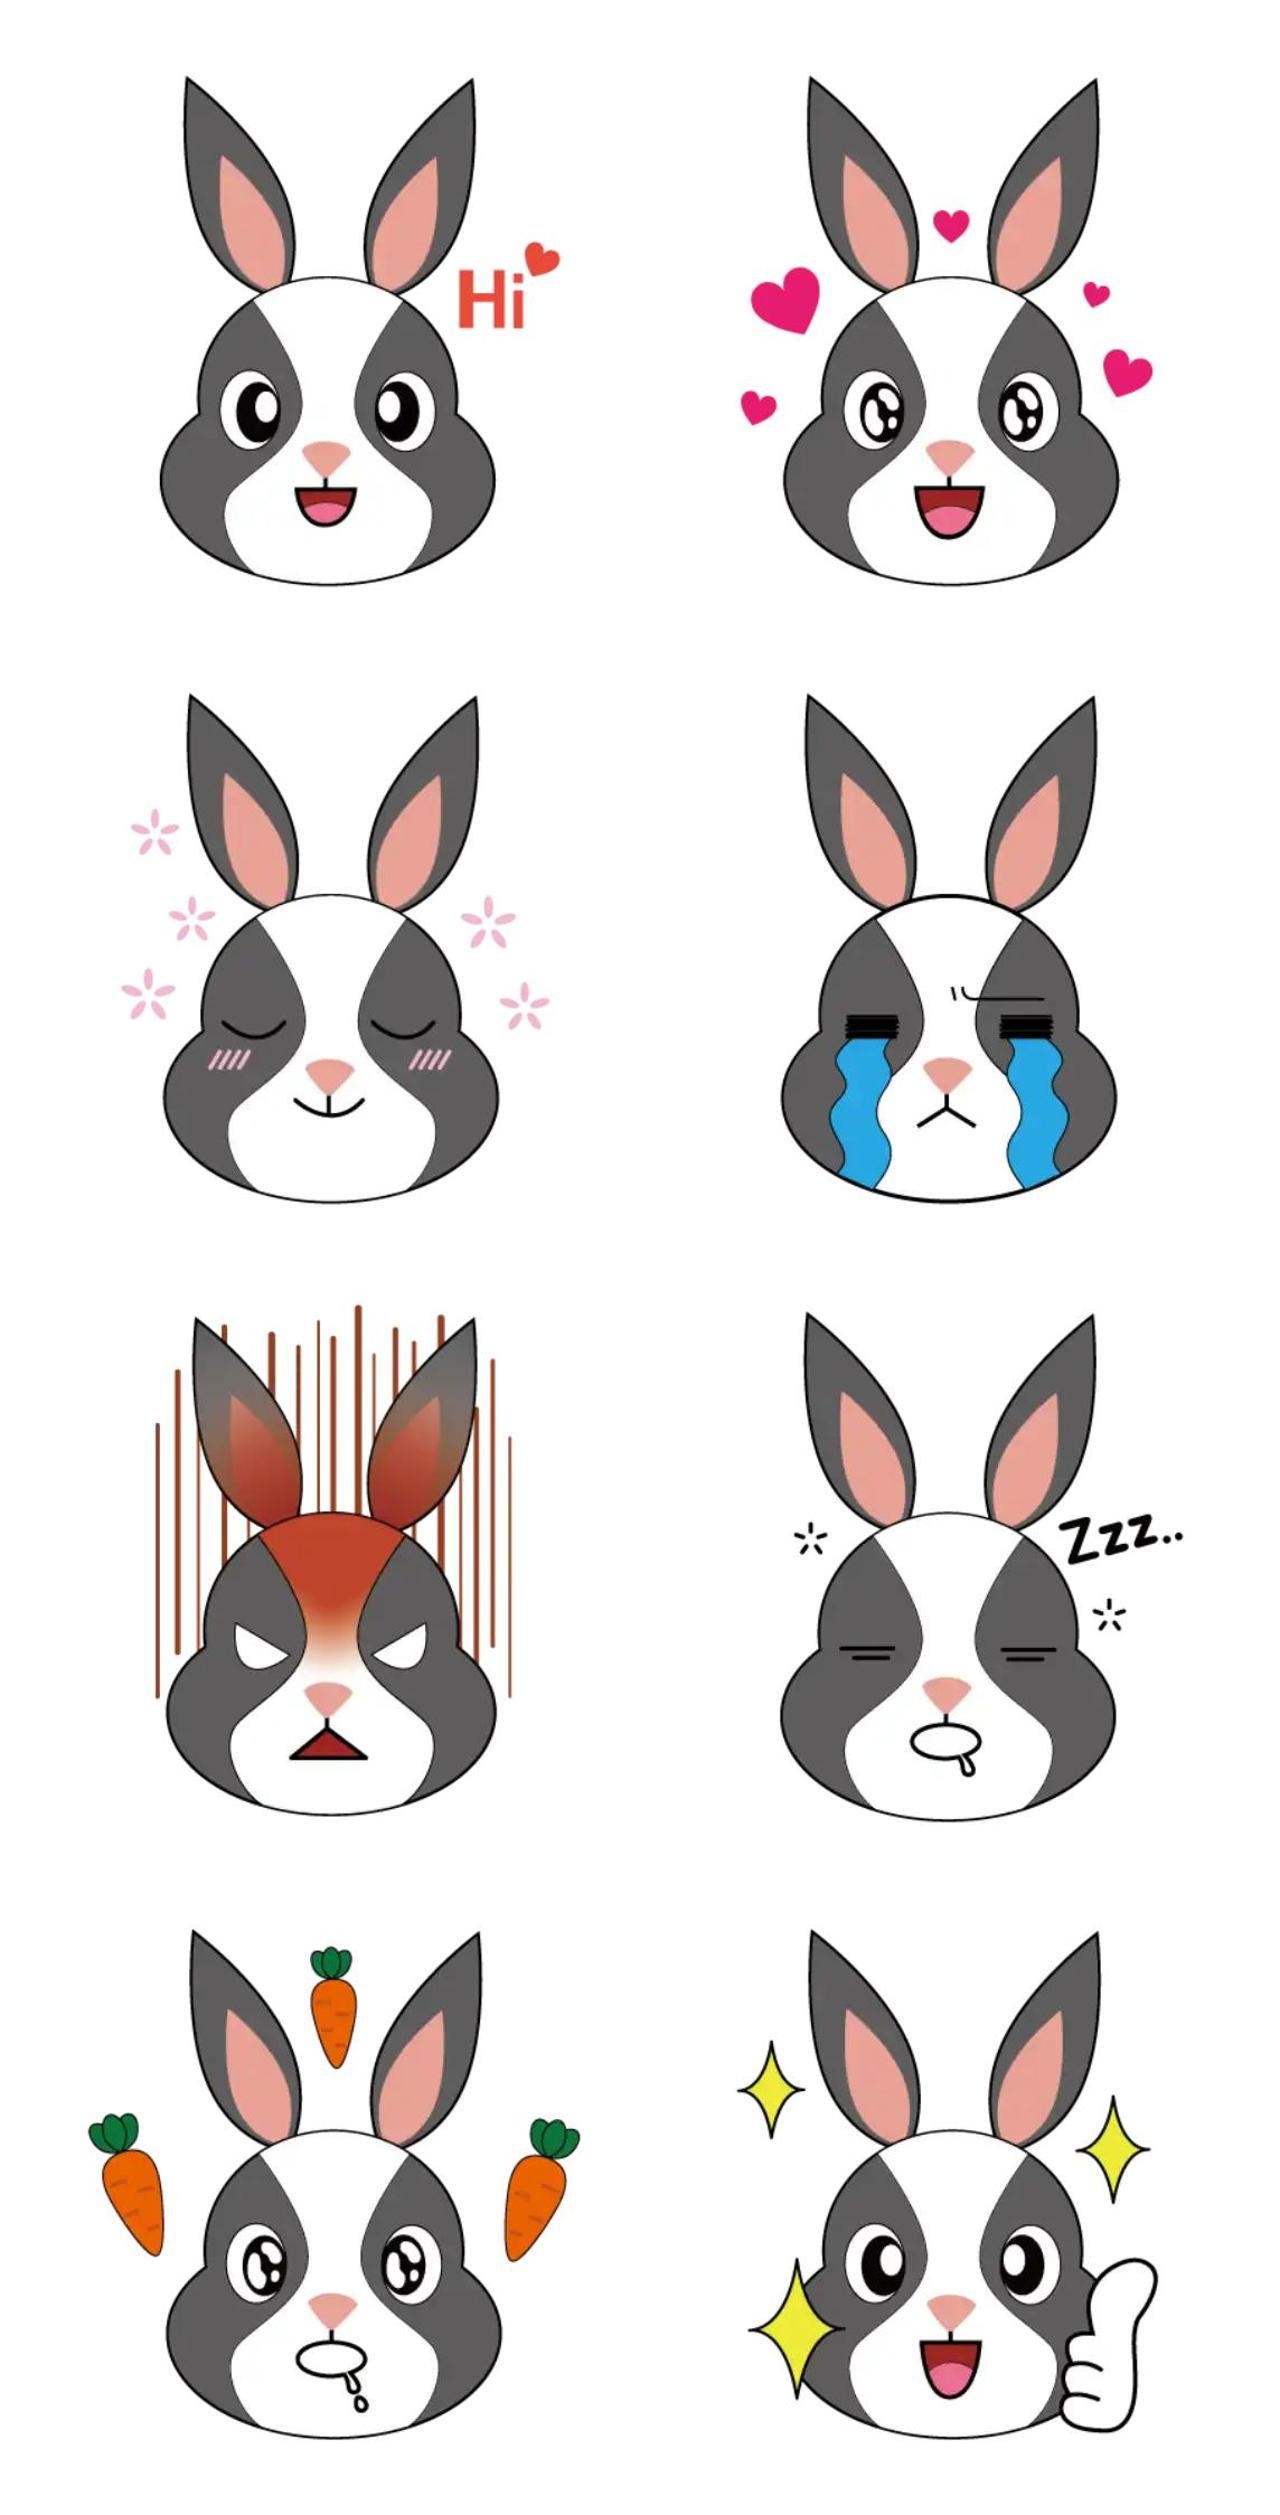 Panda Rabbit Animals sticker pack for Whatsapp, Telegram, Signal, and others chatting and message apps